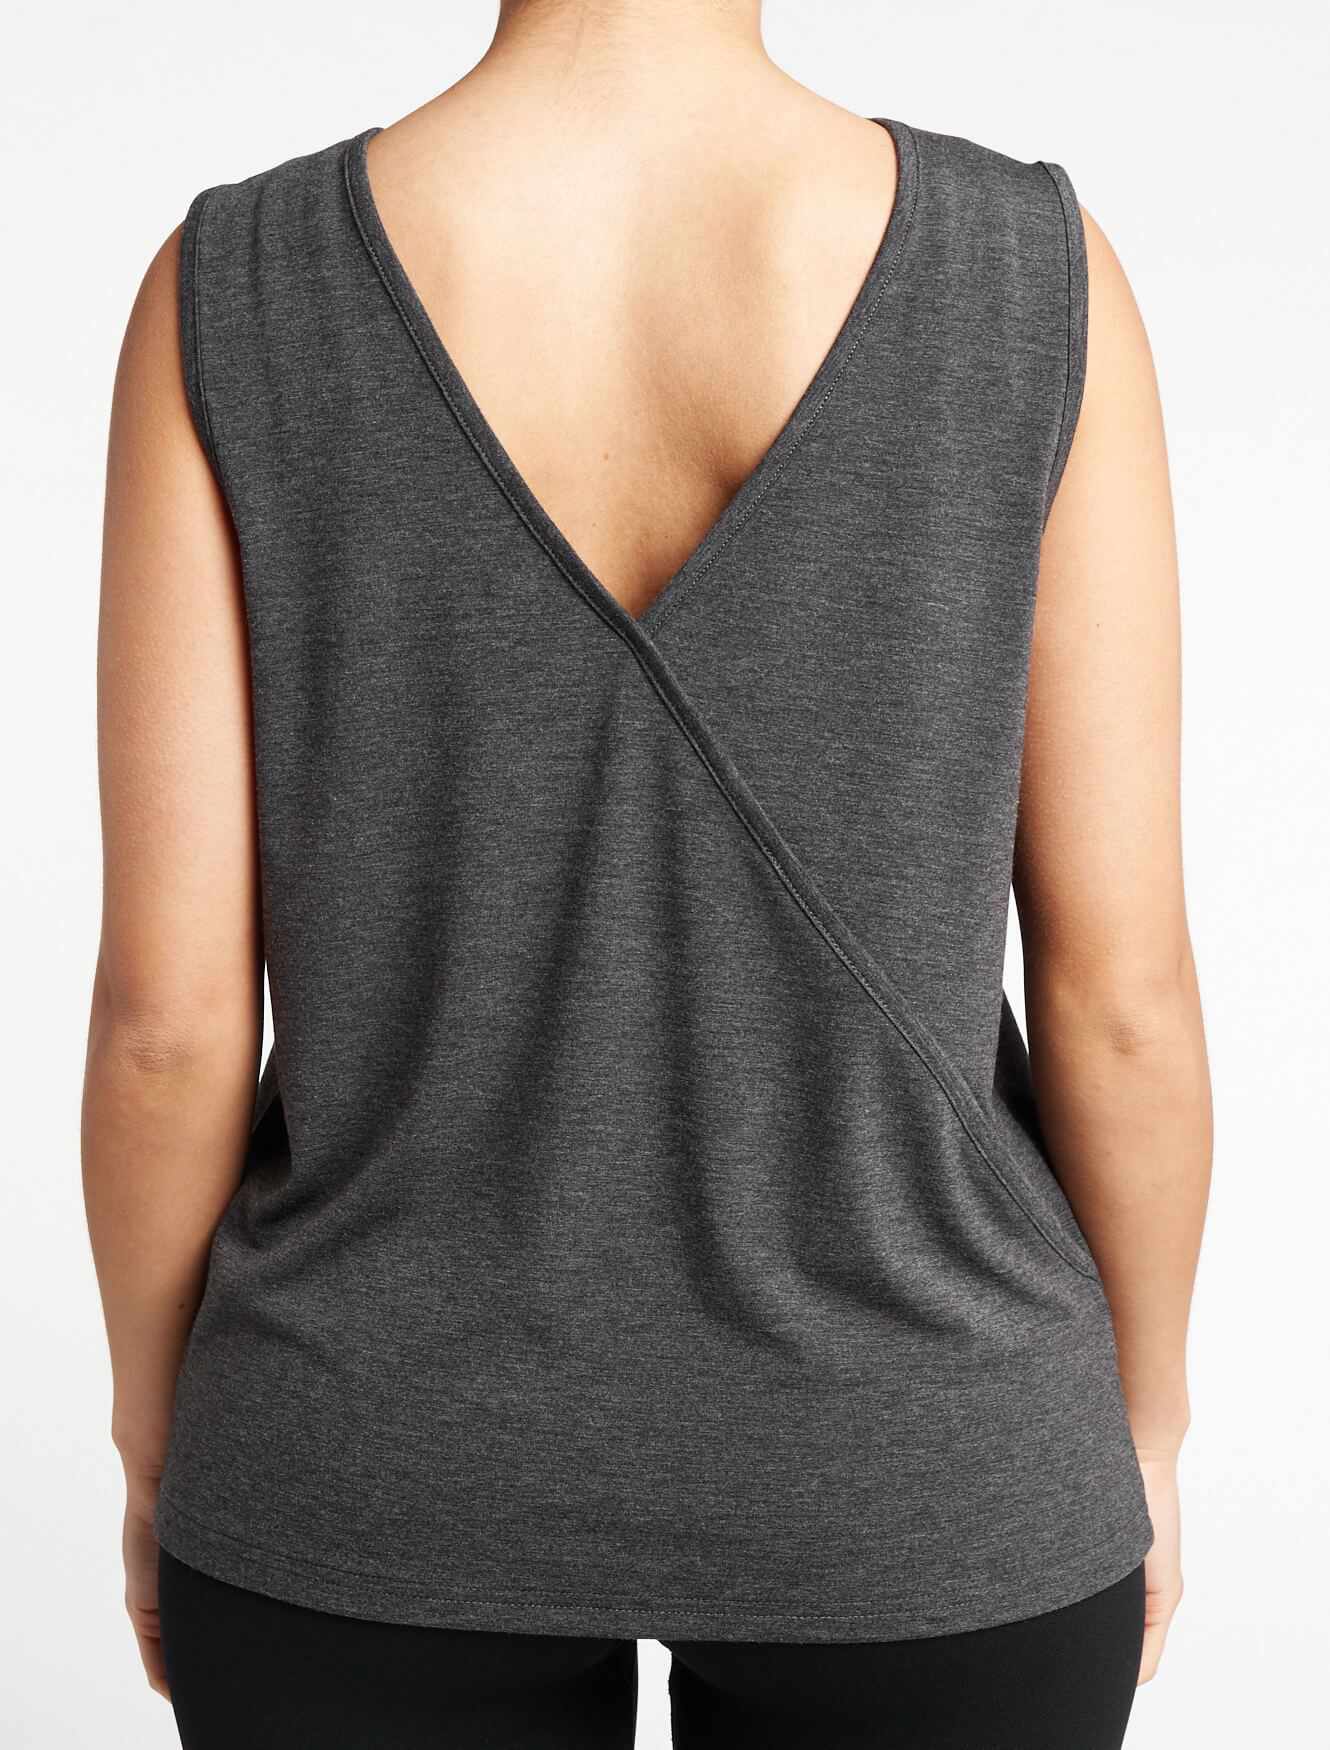 Crossover Tank Top / Charcoal Marl Pursue Fitness 6